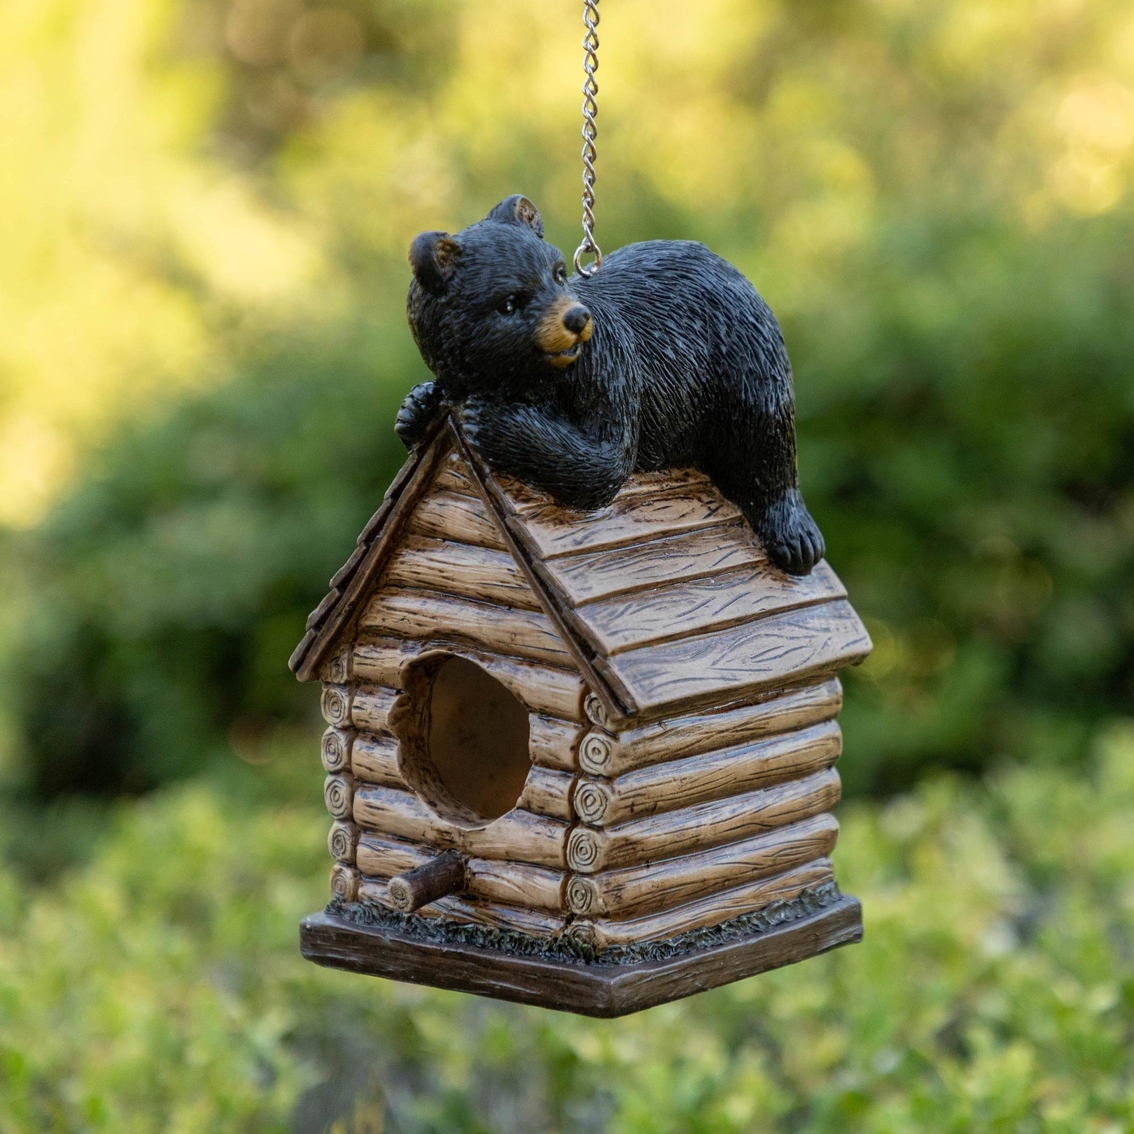 Alpine Resting Bear on Log Cabin Birdhouse, 8 in. Tall - Image 3 of 5